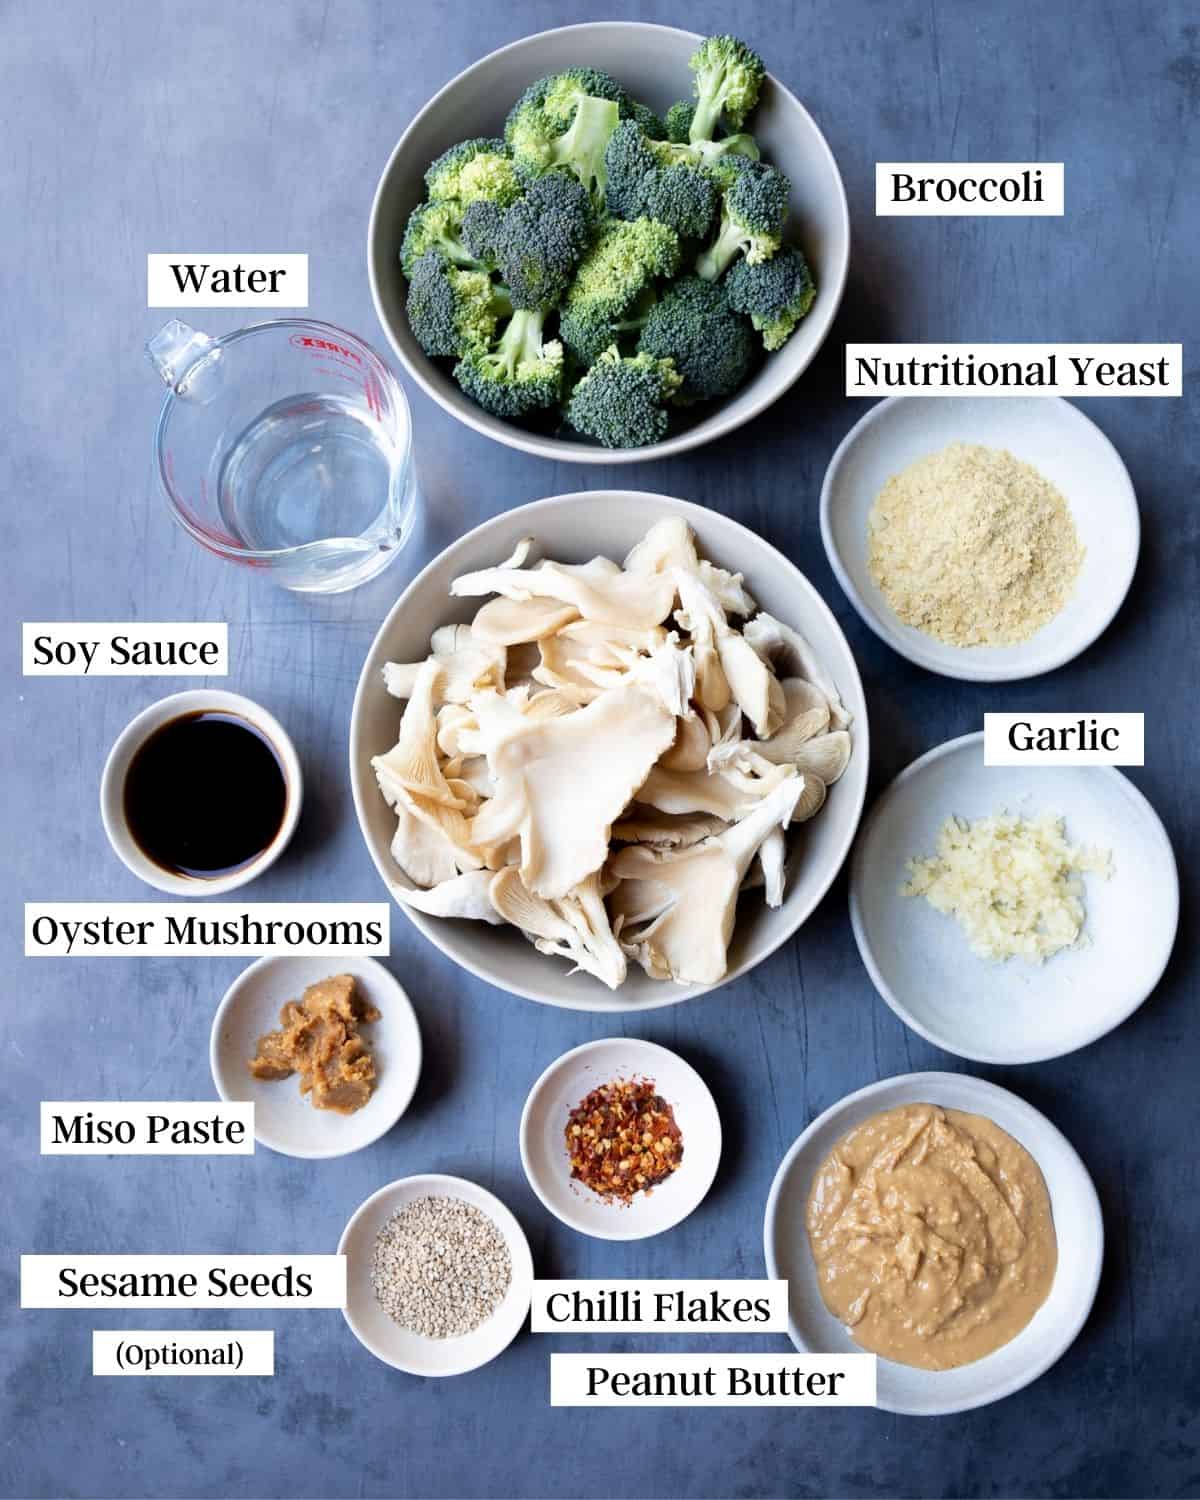 Ingredients in bowls on a dark surface.